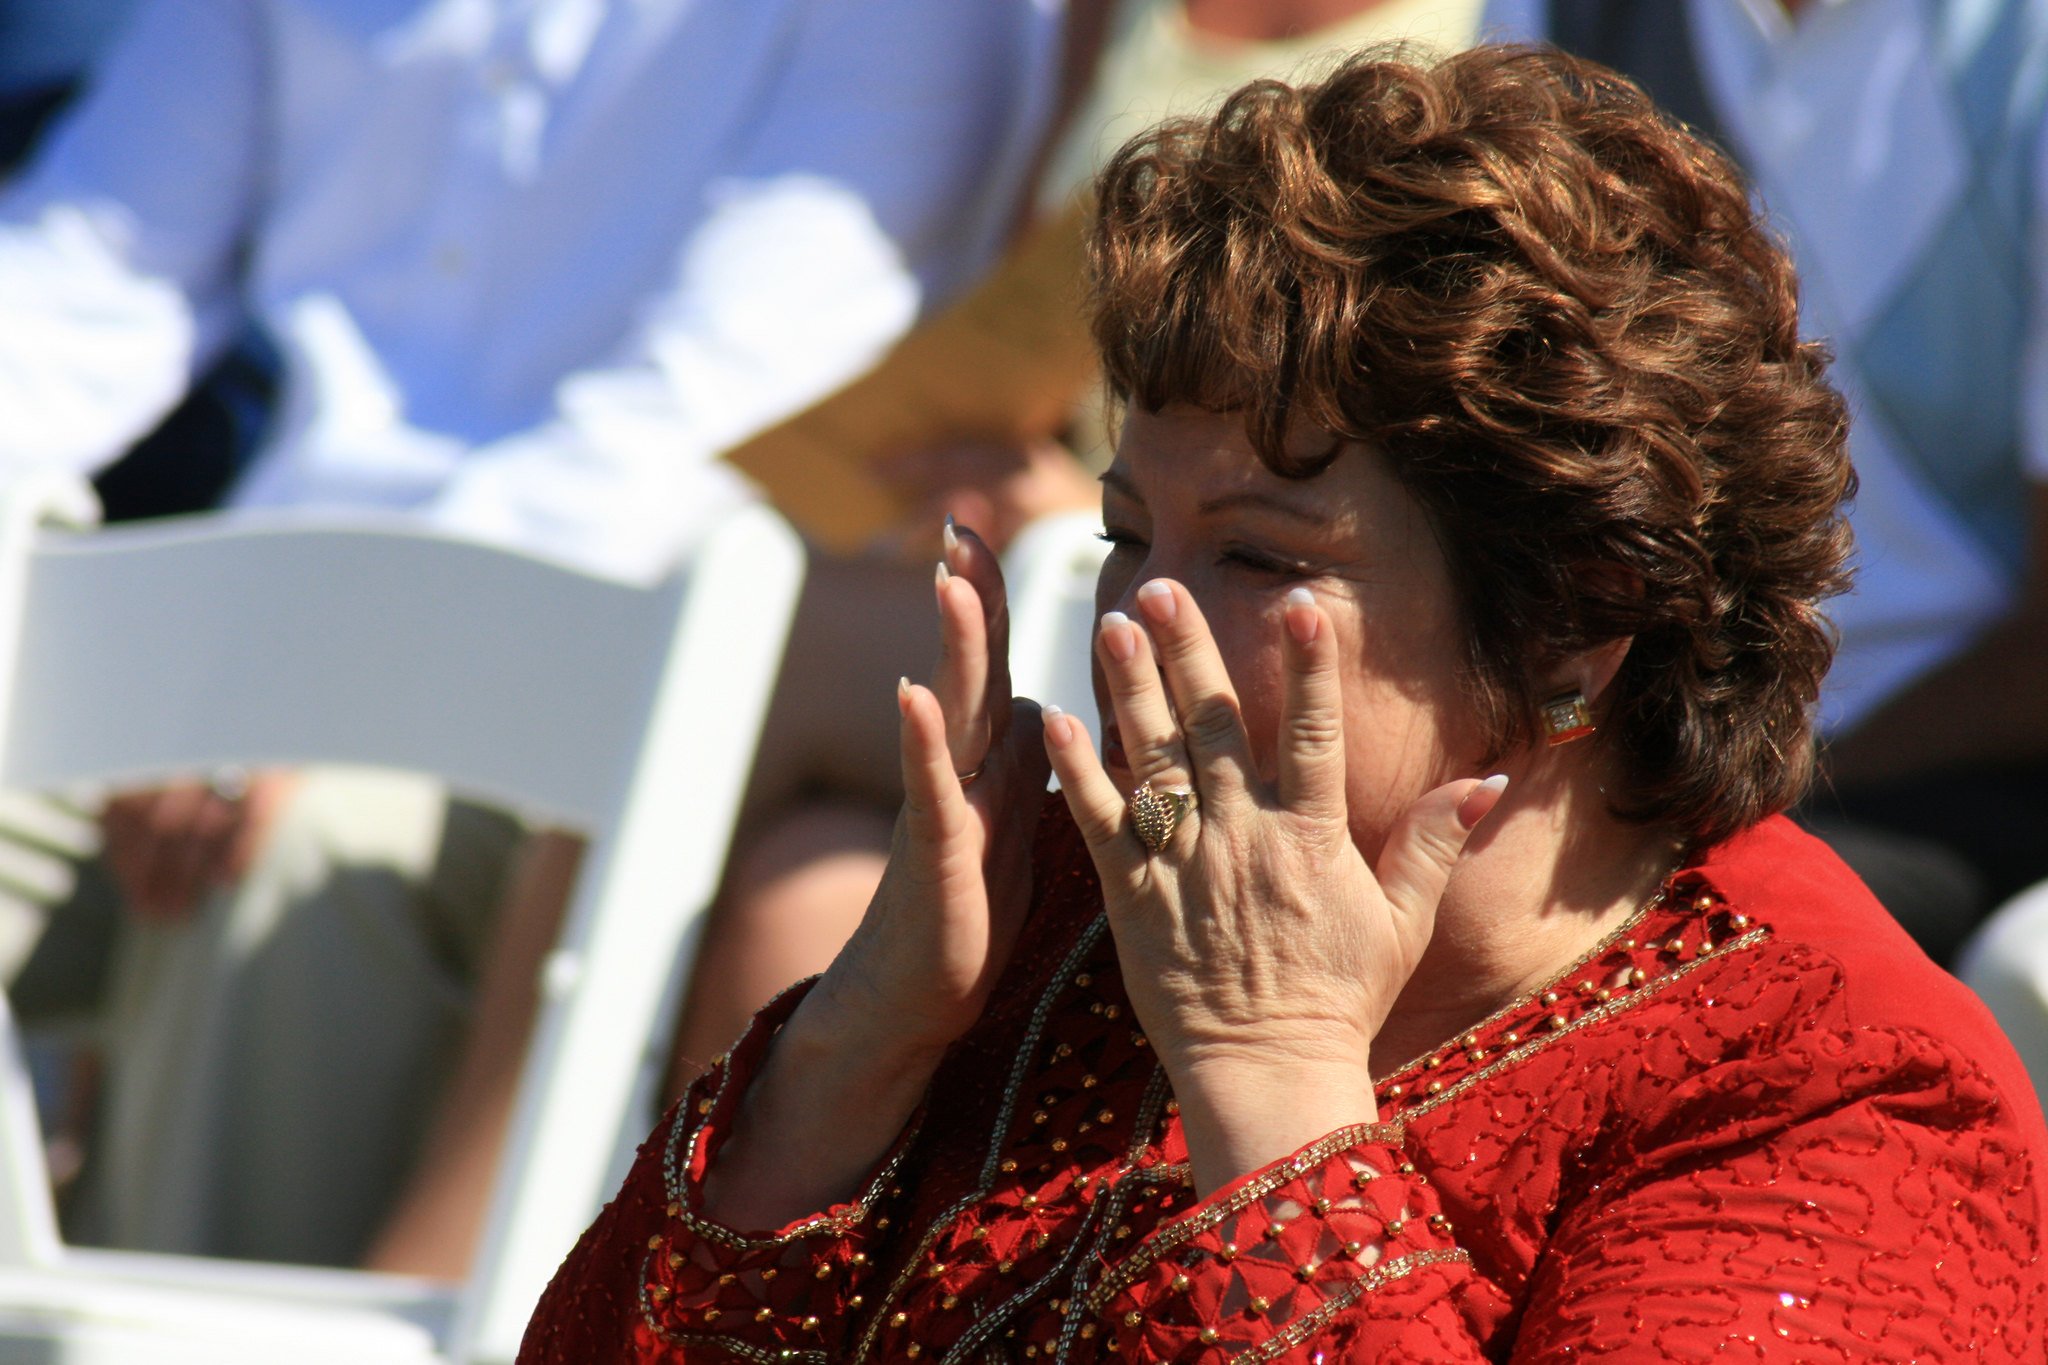 Woman crying at a wedding. | Source: Flickr/Quinn Dombrowski